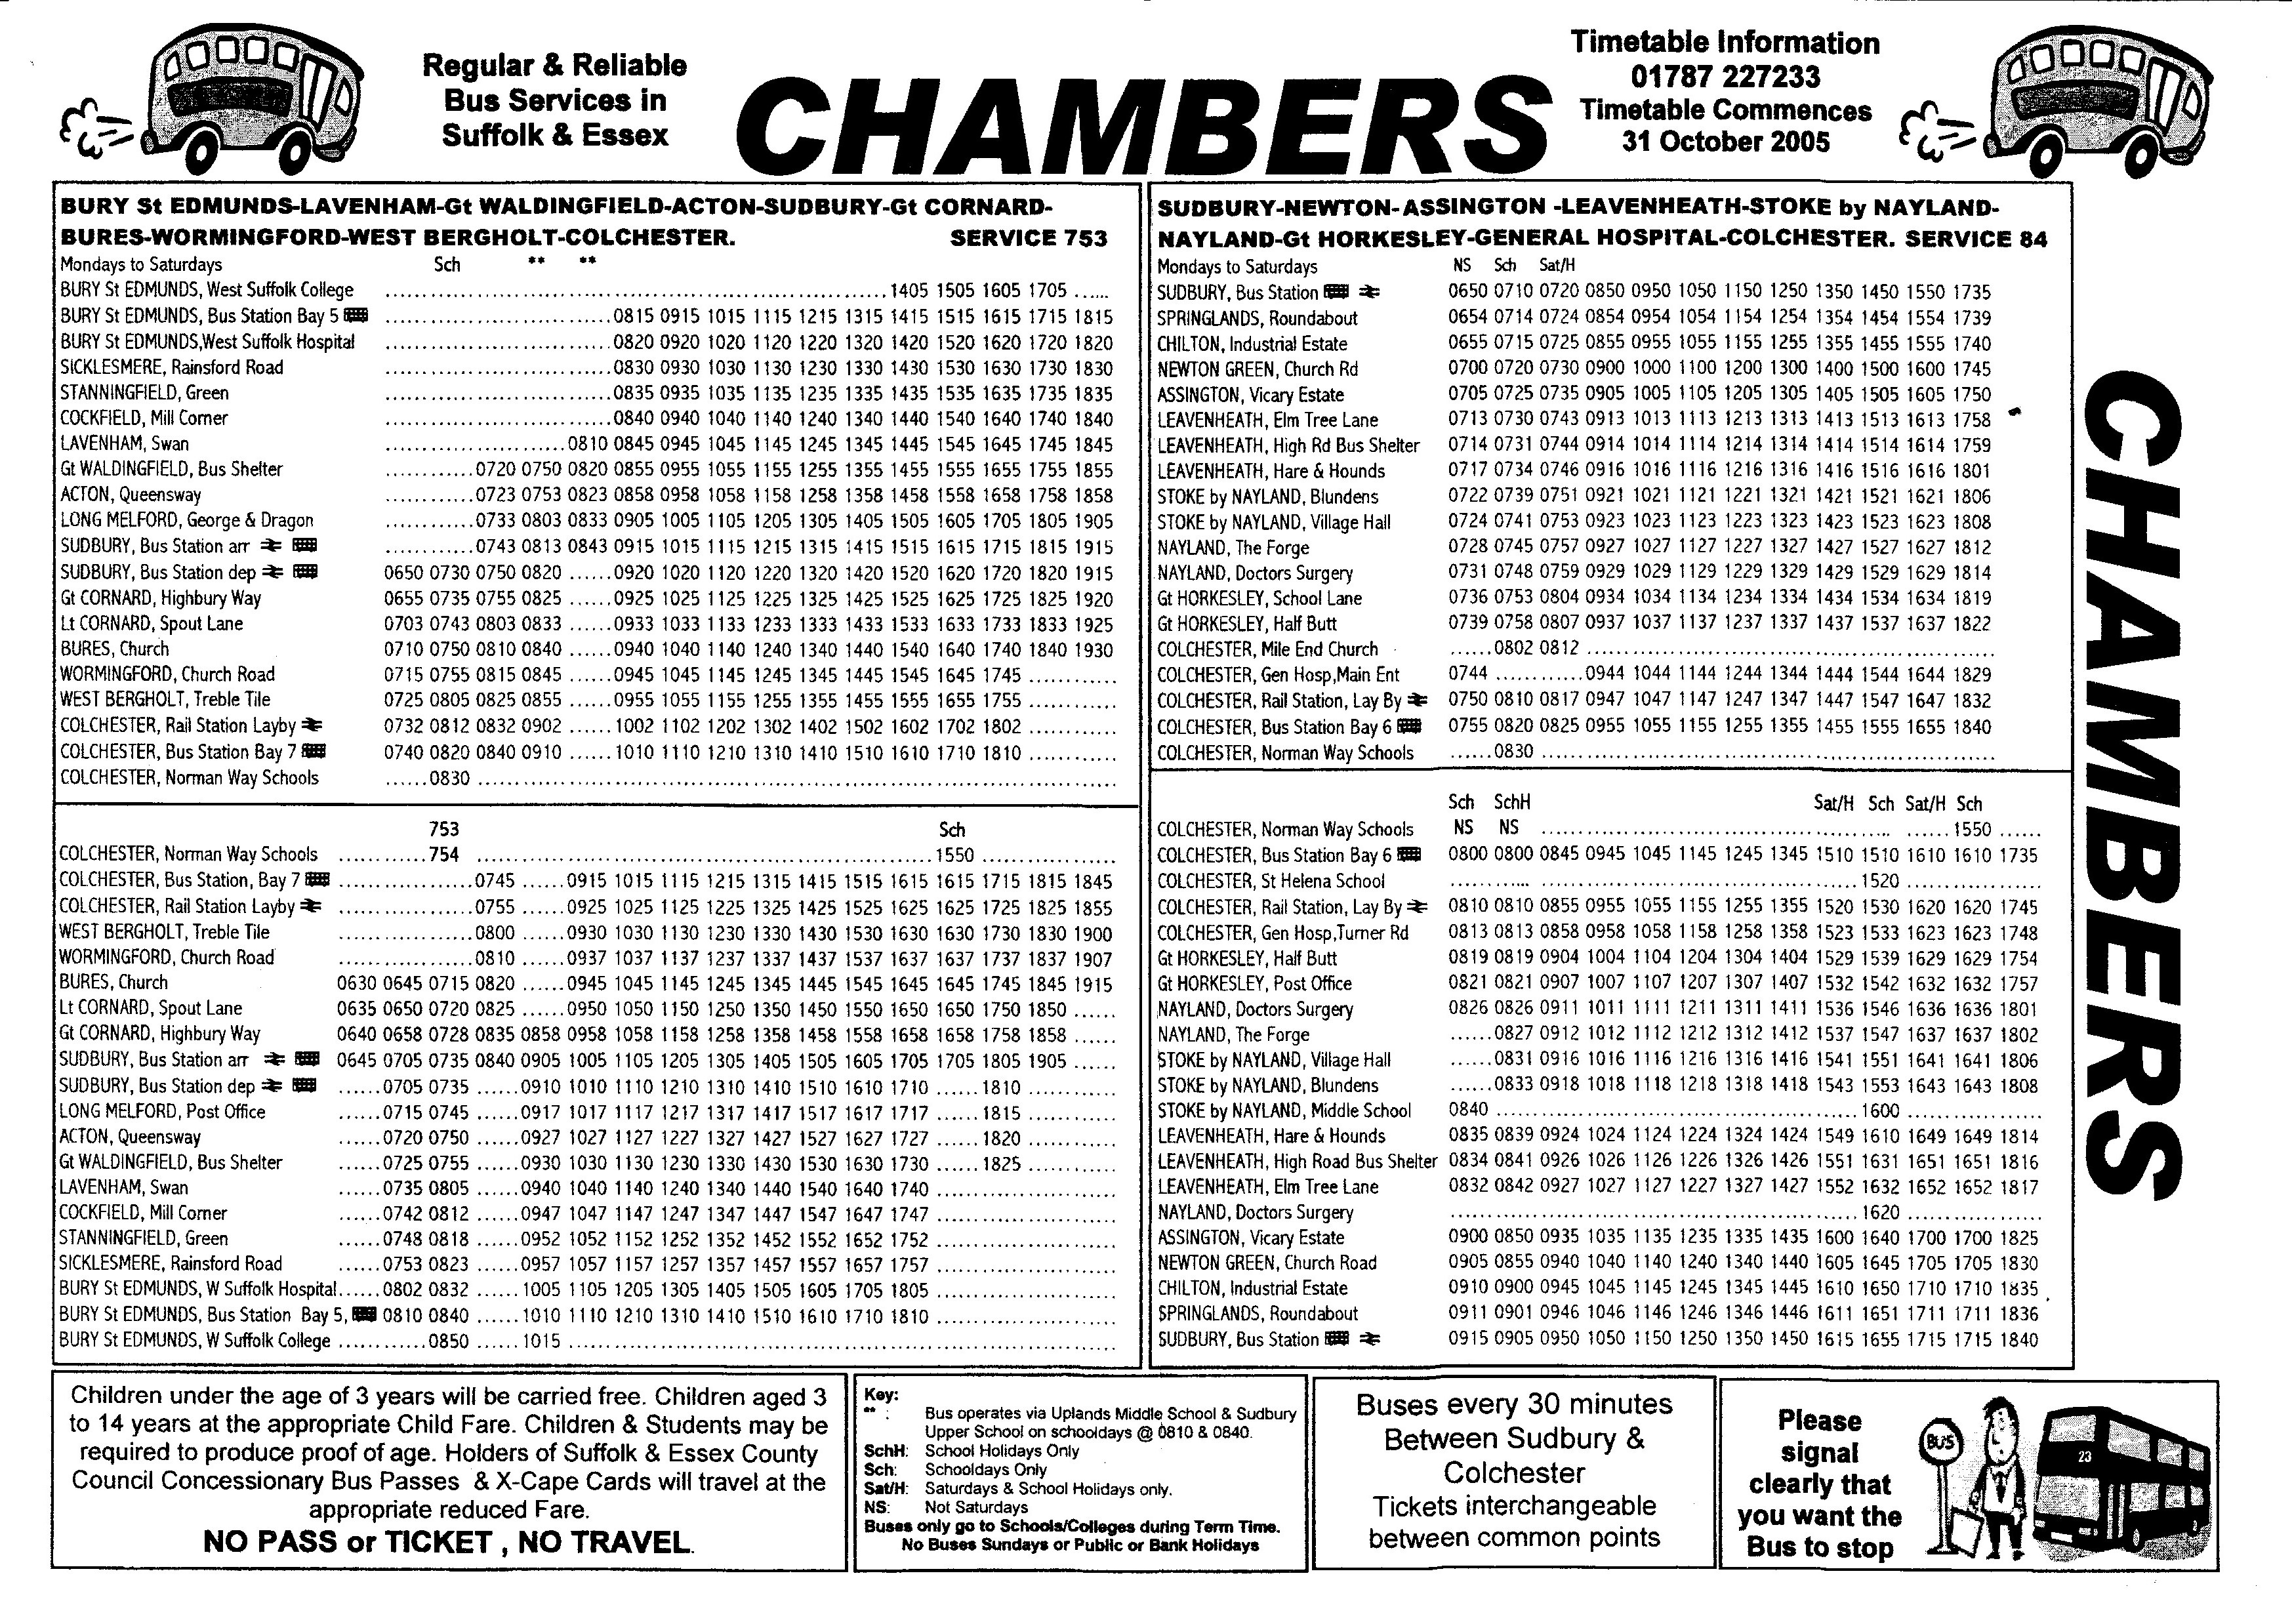 2005 timetable page one